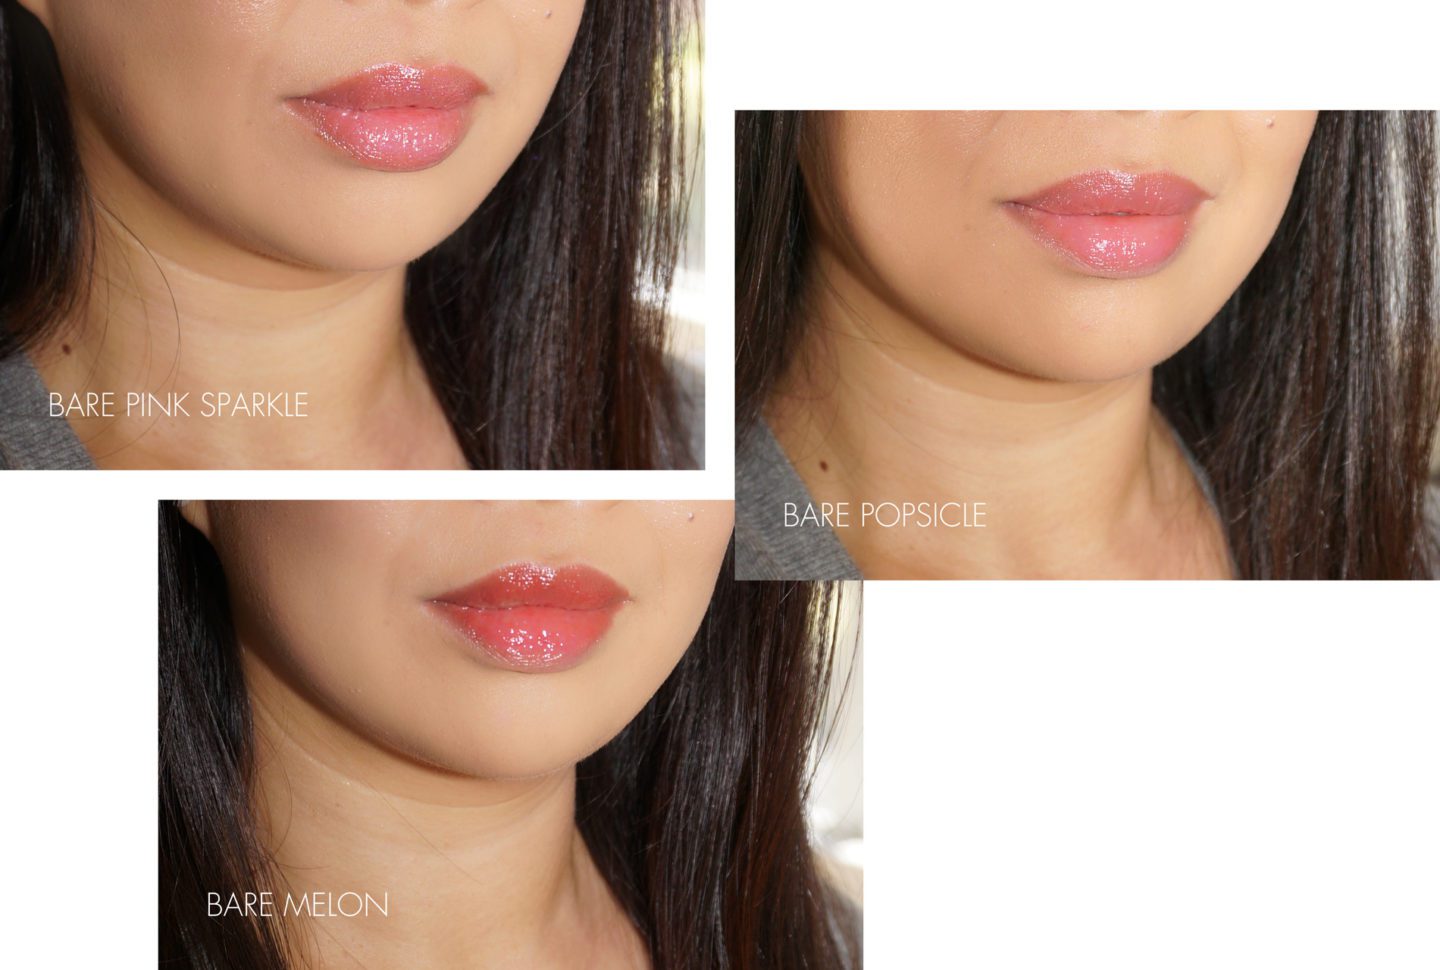 Bobbi Brown Extra Lip Tints Bare Pink Sparkle, Bare Melon and Bare Popsicle swatches | The Beauty Look Book